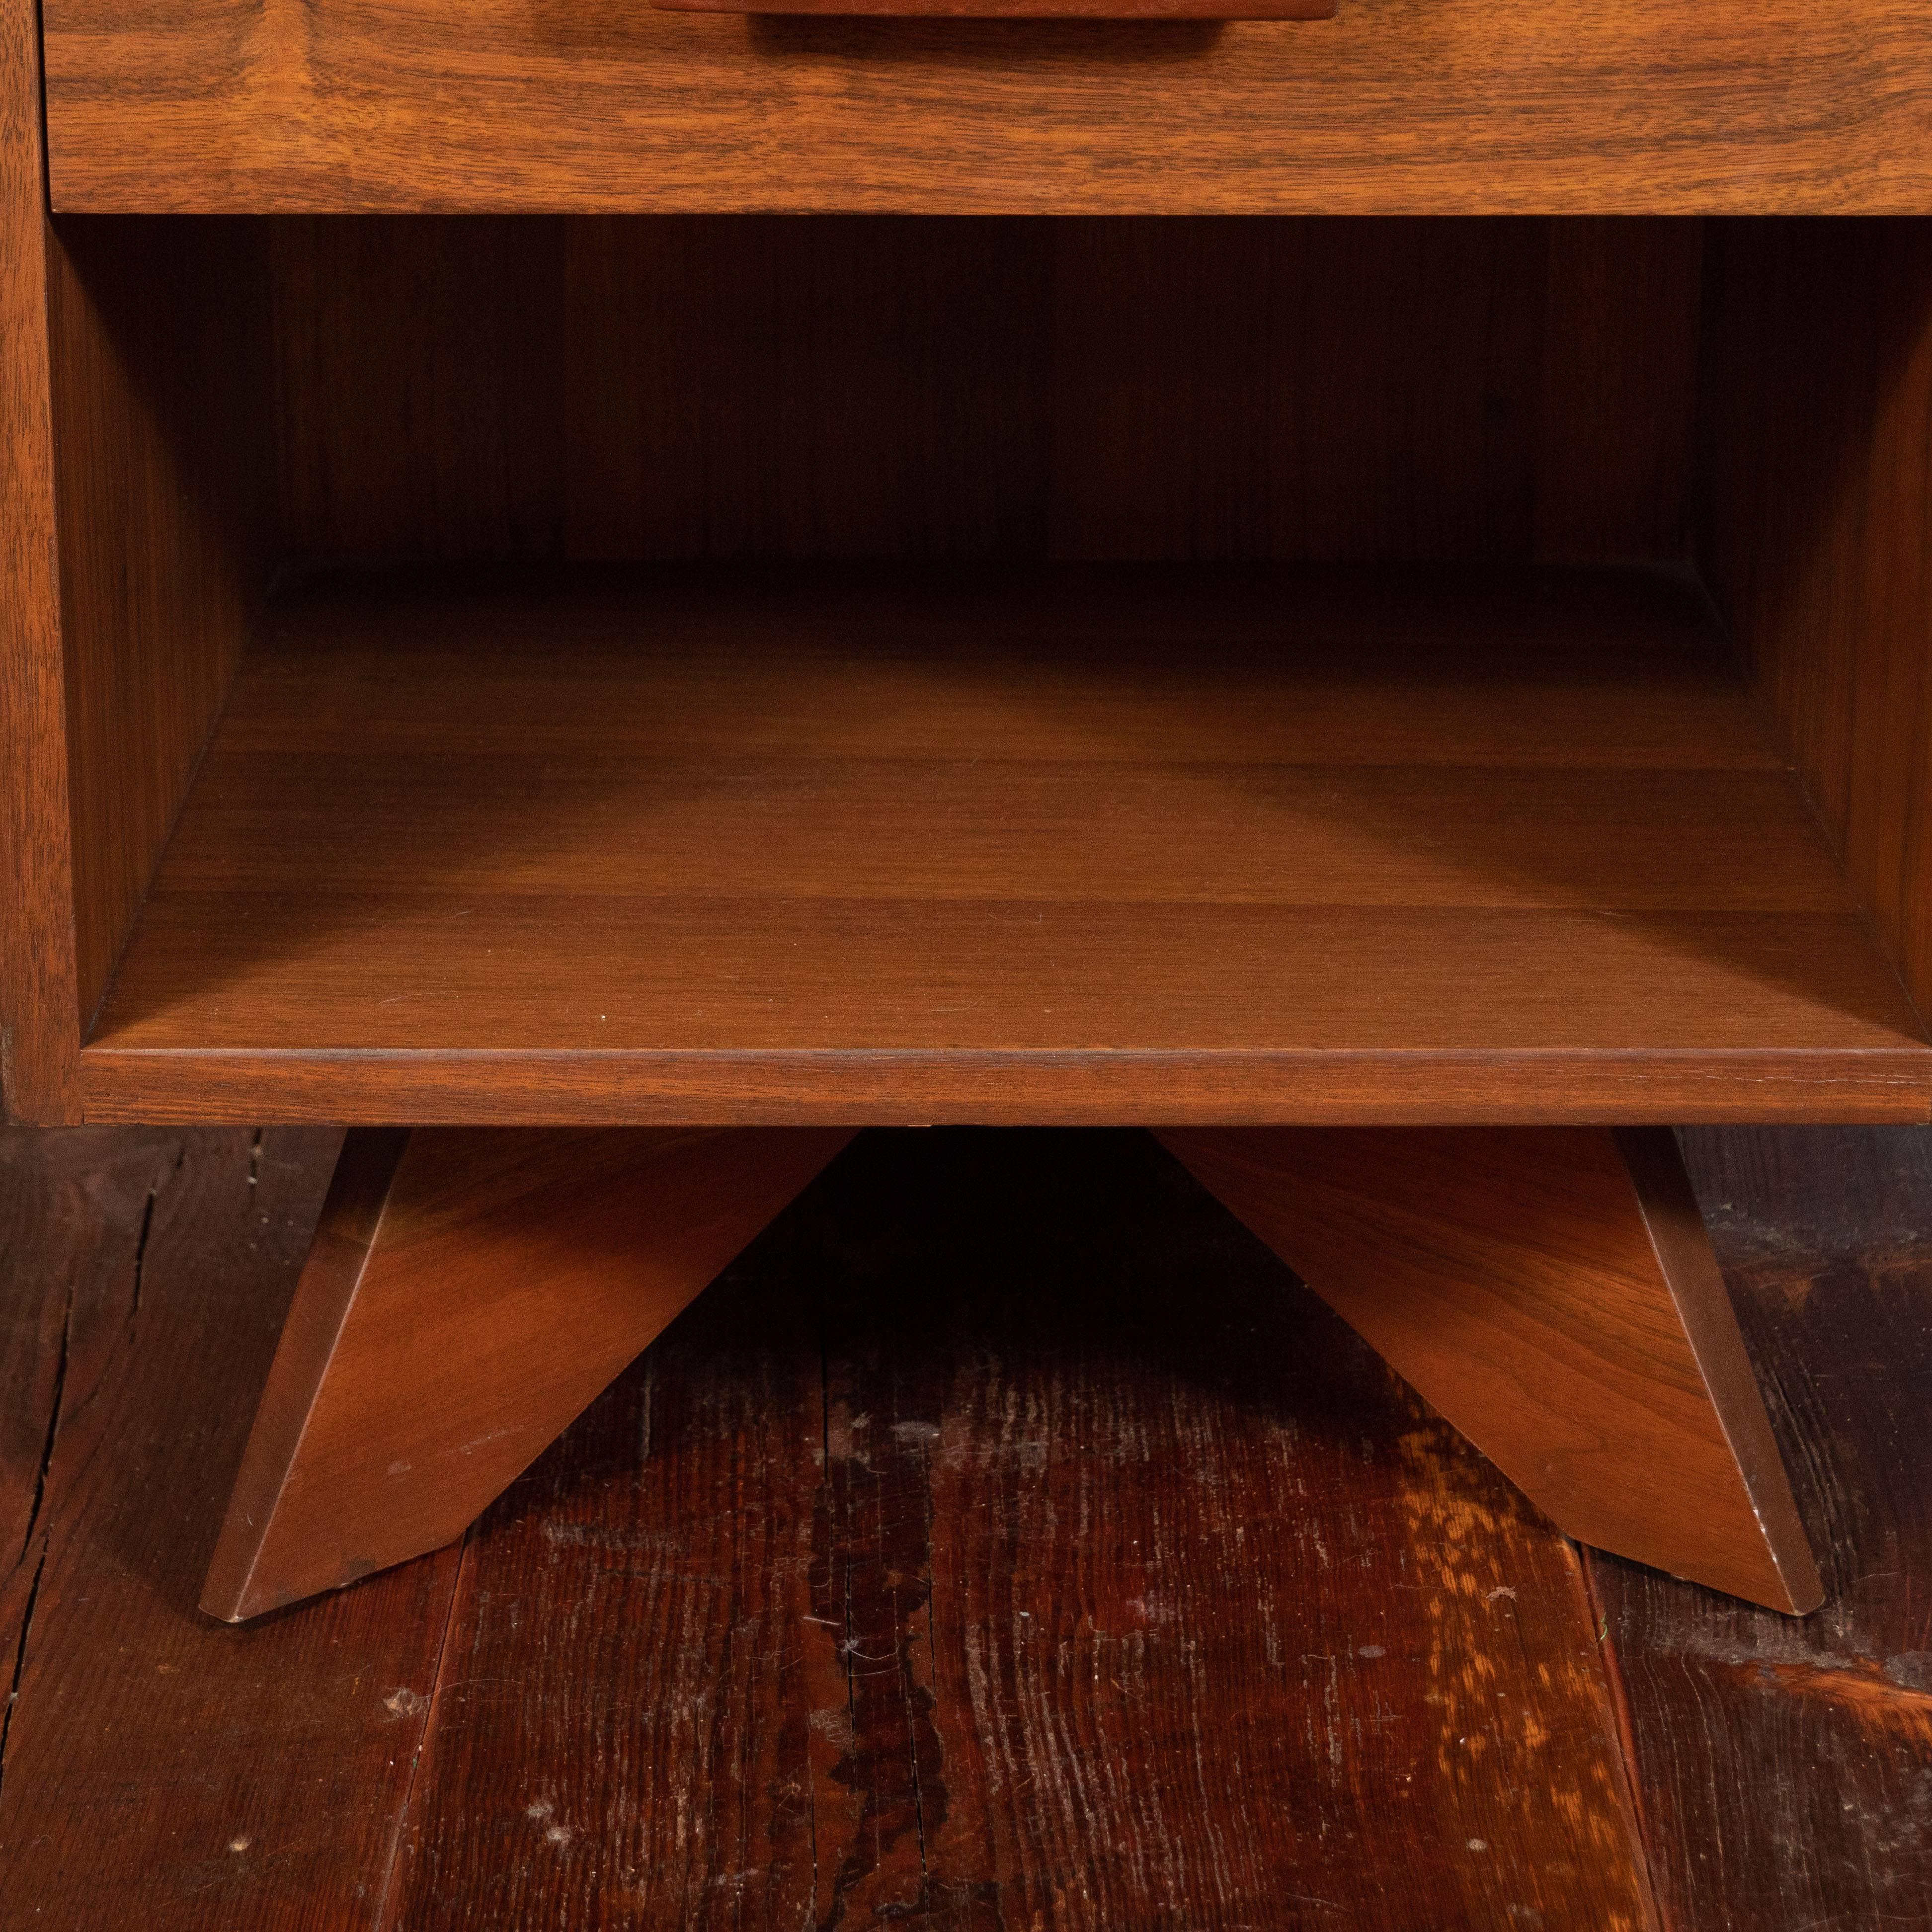 This American Mid-Century Modern nightstand or side table was designed in 1958 by George Nakashima (1905-1990) for his Origins Line, produced by the Widdicomb Furniture Company, Grand Rapids, Michigan. The nightstand or side table is in East Indian